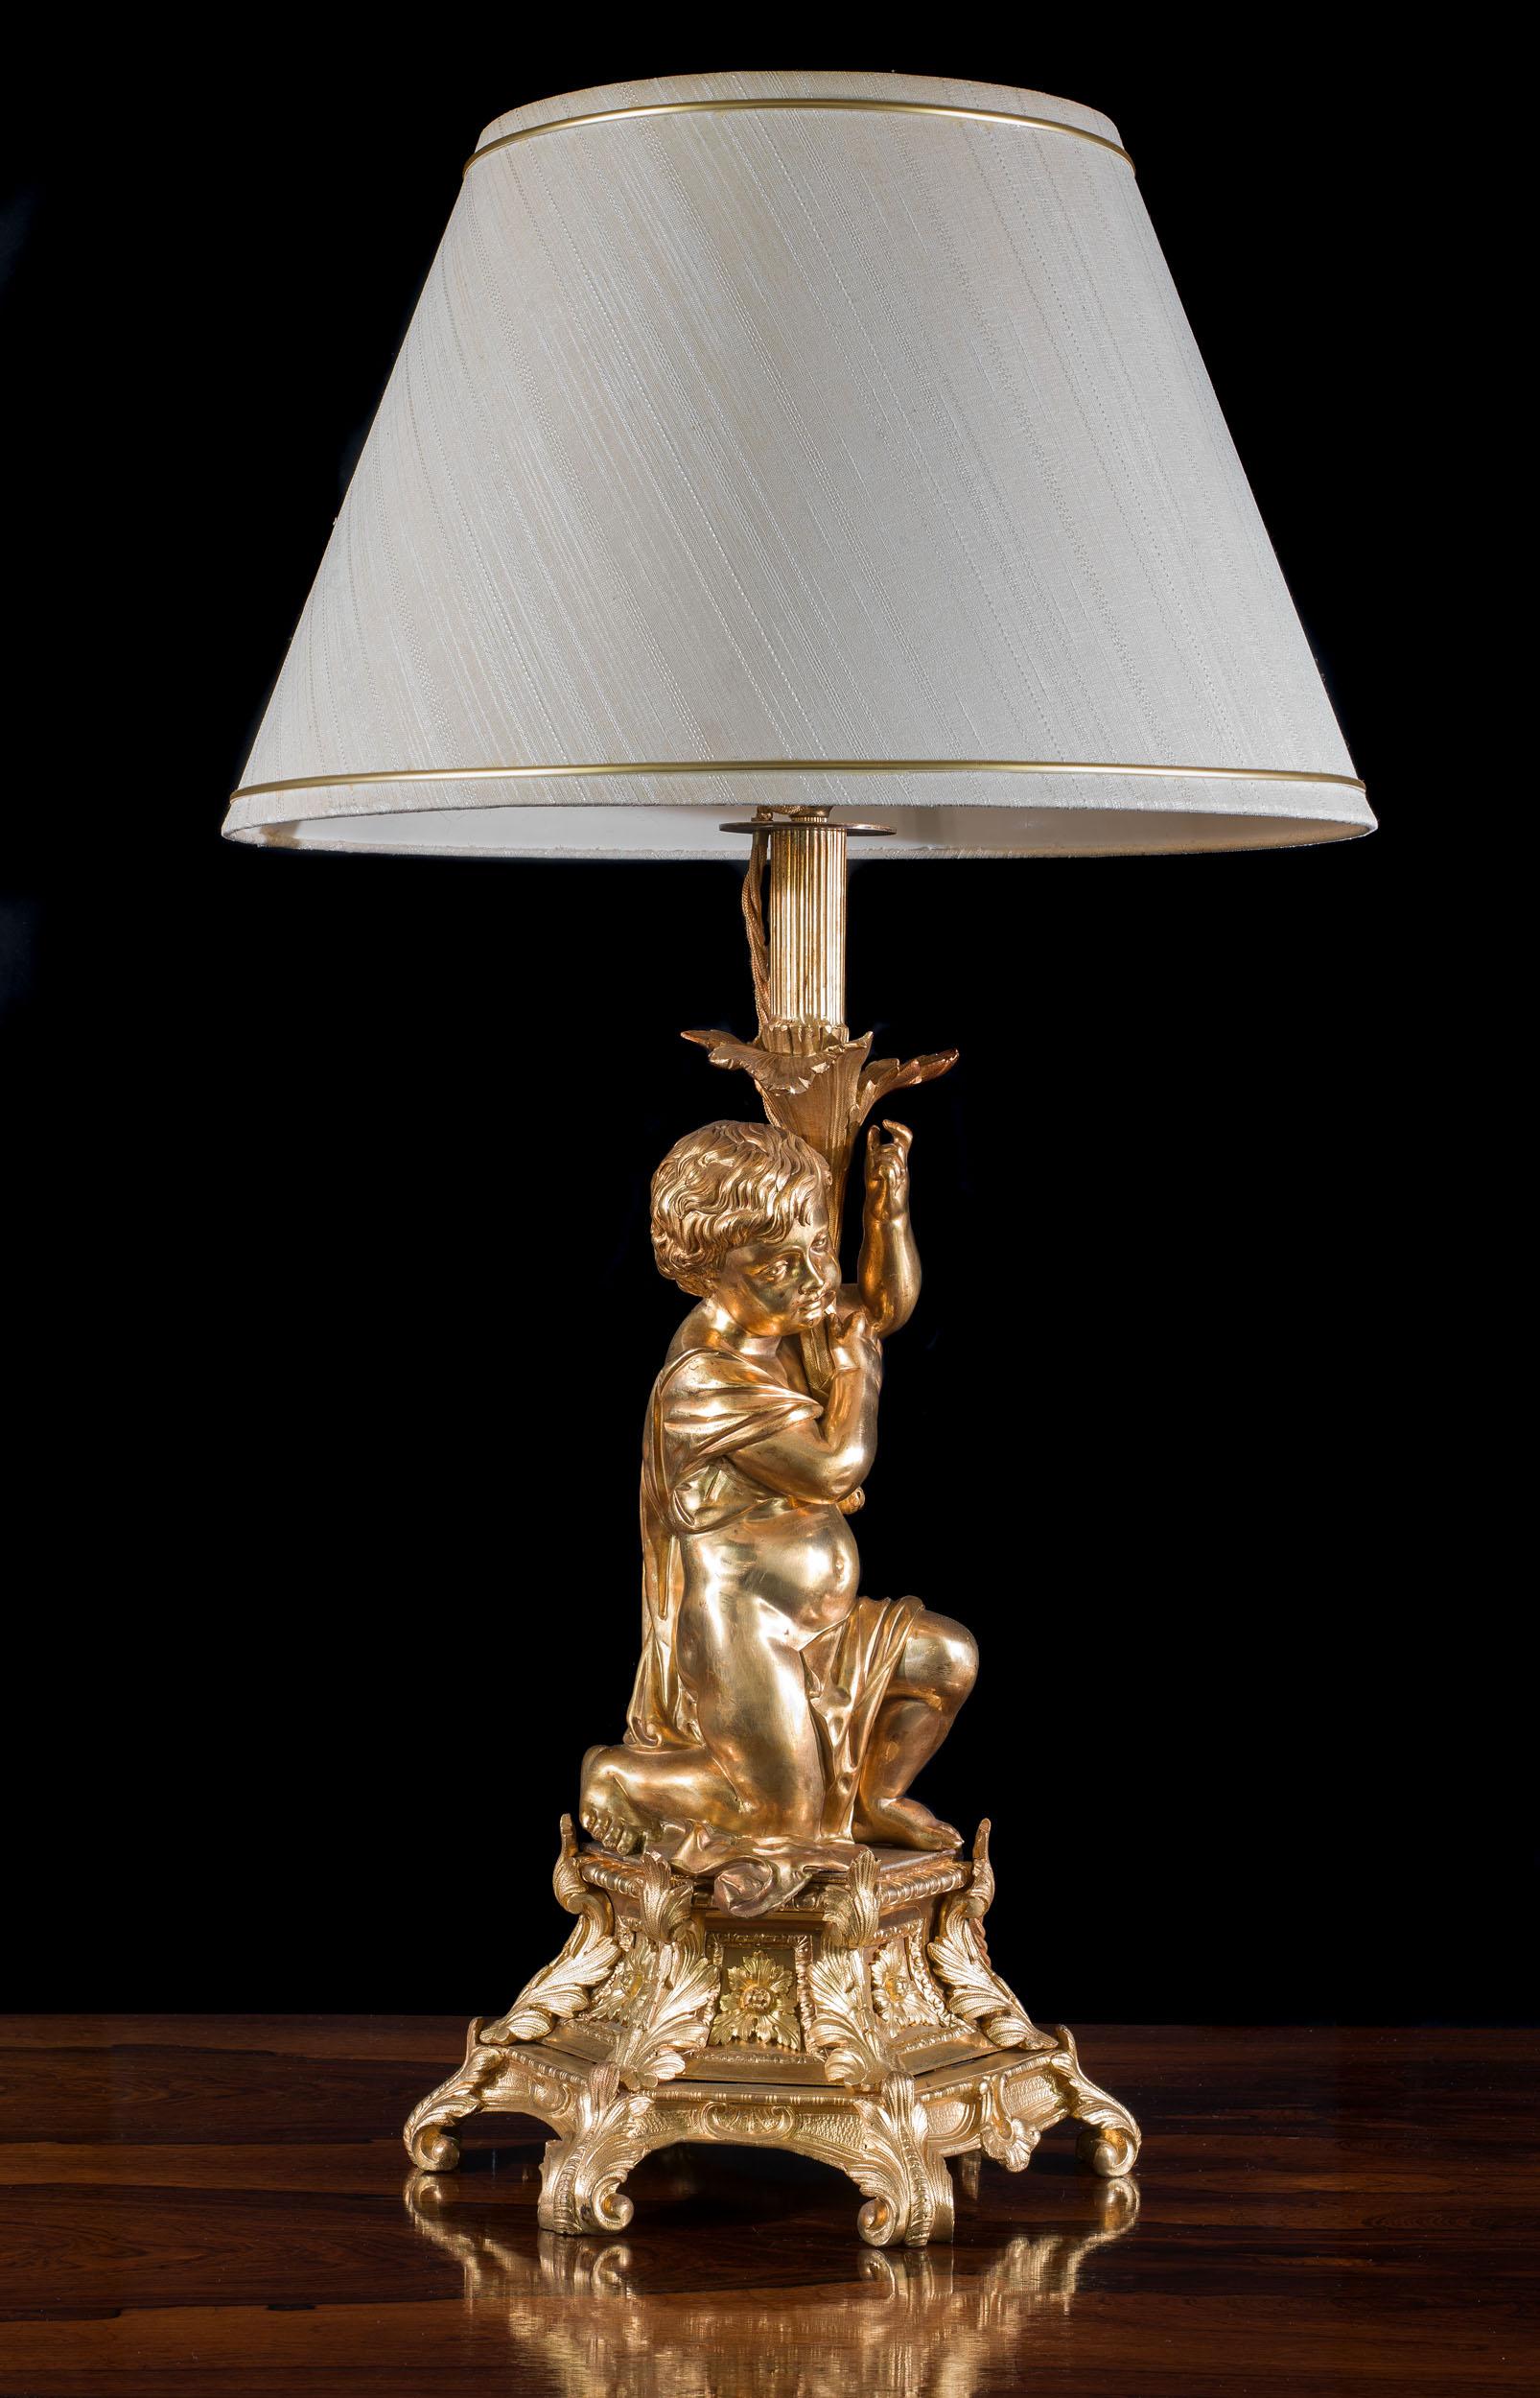 A large and ornate gilt bronze lamp, modeled as a putto holding the lamp fitting aloft whilst kneeling on a hexagonal base embellished with foliate Rococo decorations.

French, c. 1880.